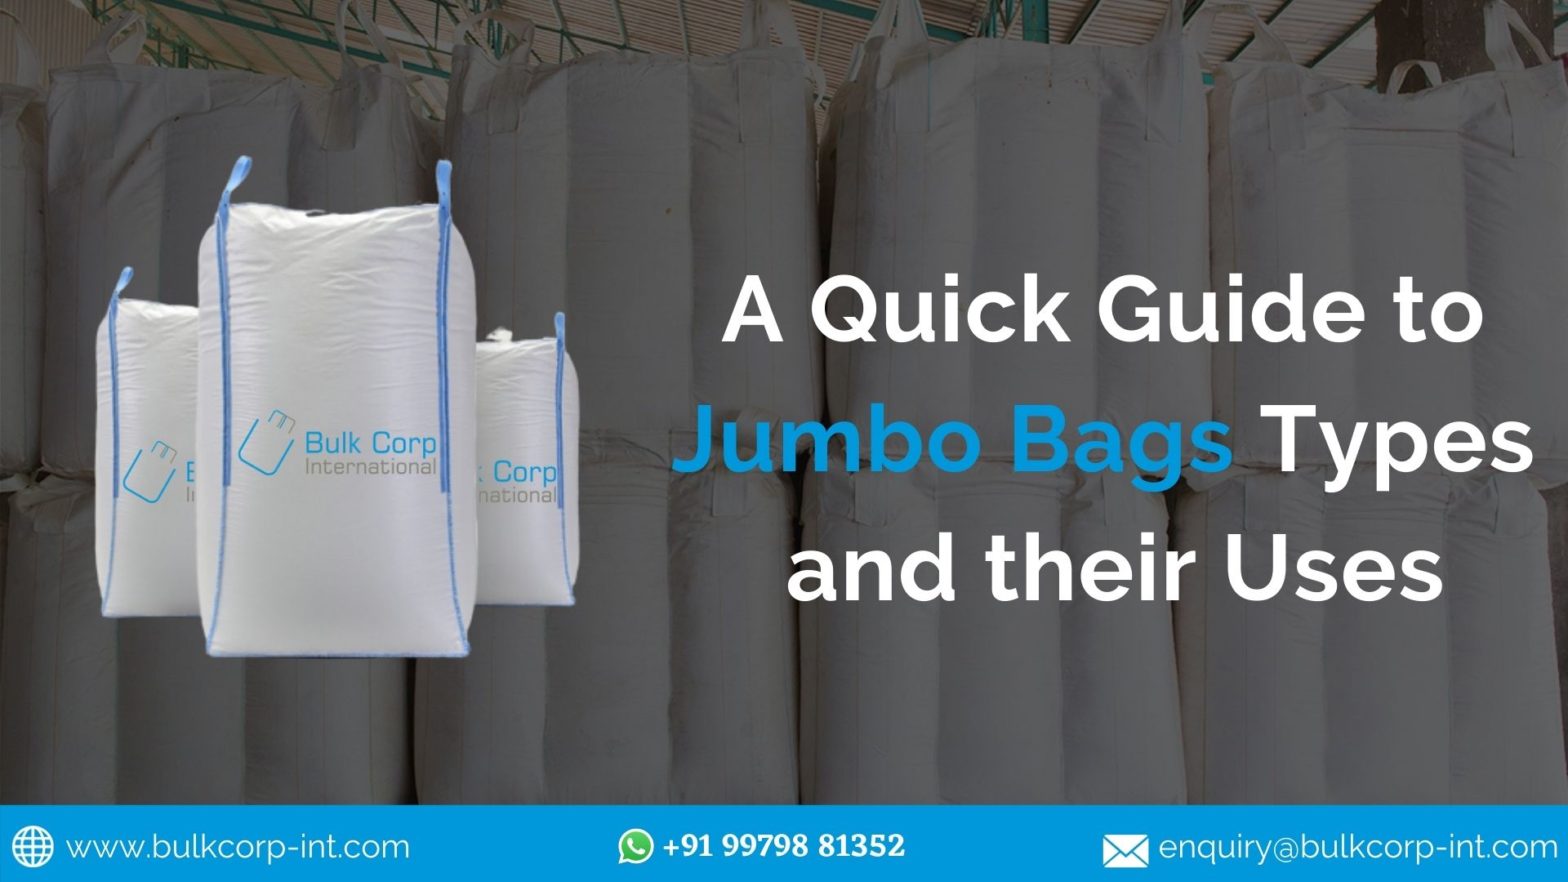 A Quick Guide to Jumbo Bags Types and their Uses